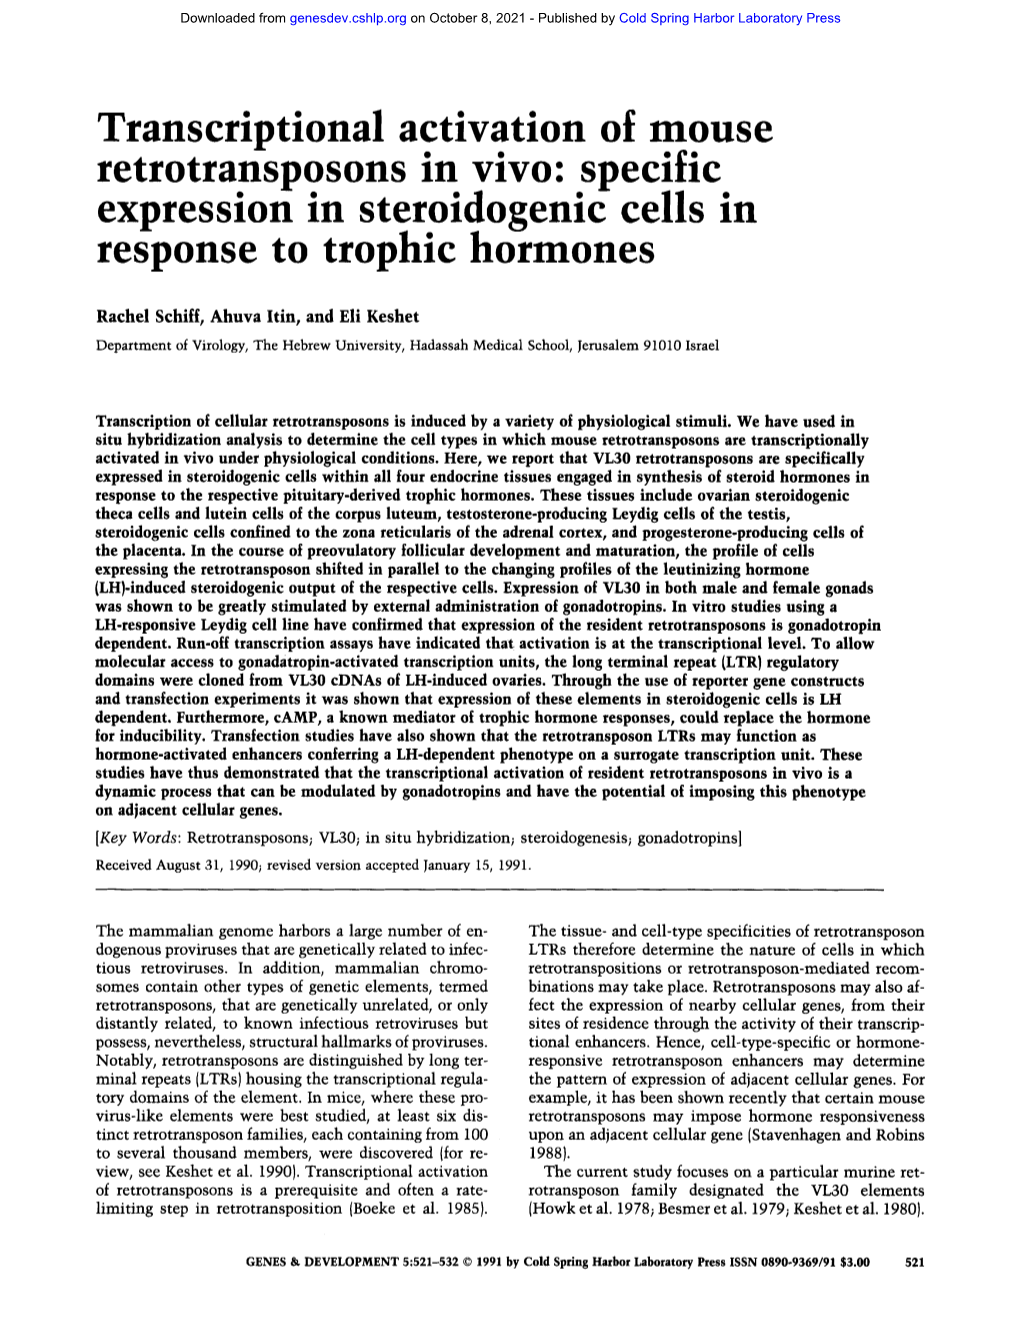 Transcriptional Activation of Mouse Retrotransposons in Vivo: Specific Expression in Ster.Oidogenic Cells in Response to Trophlc Hormones